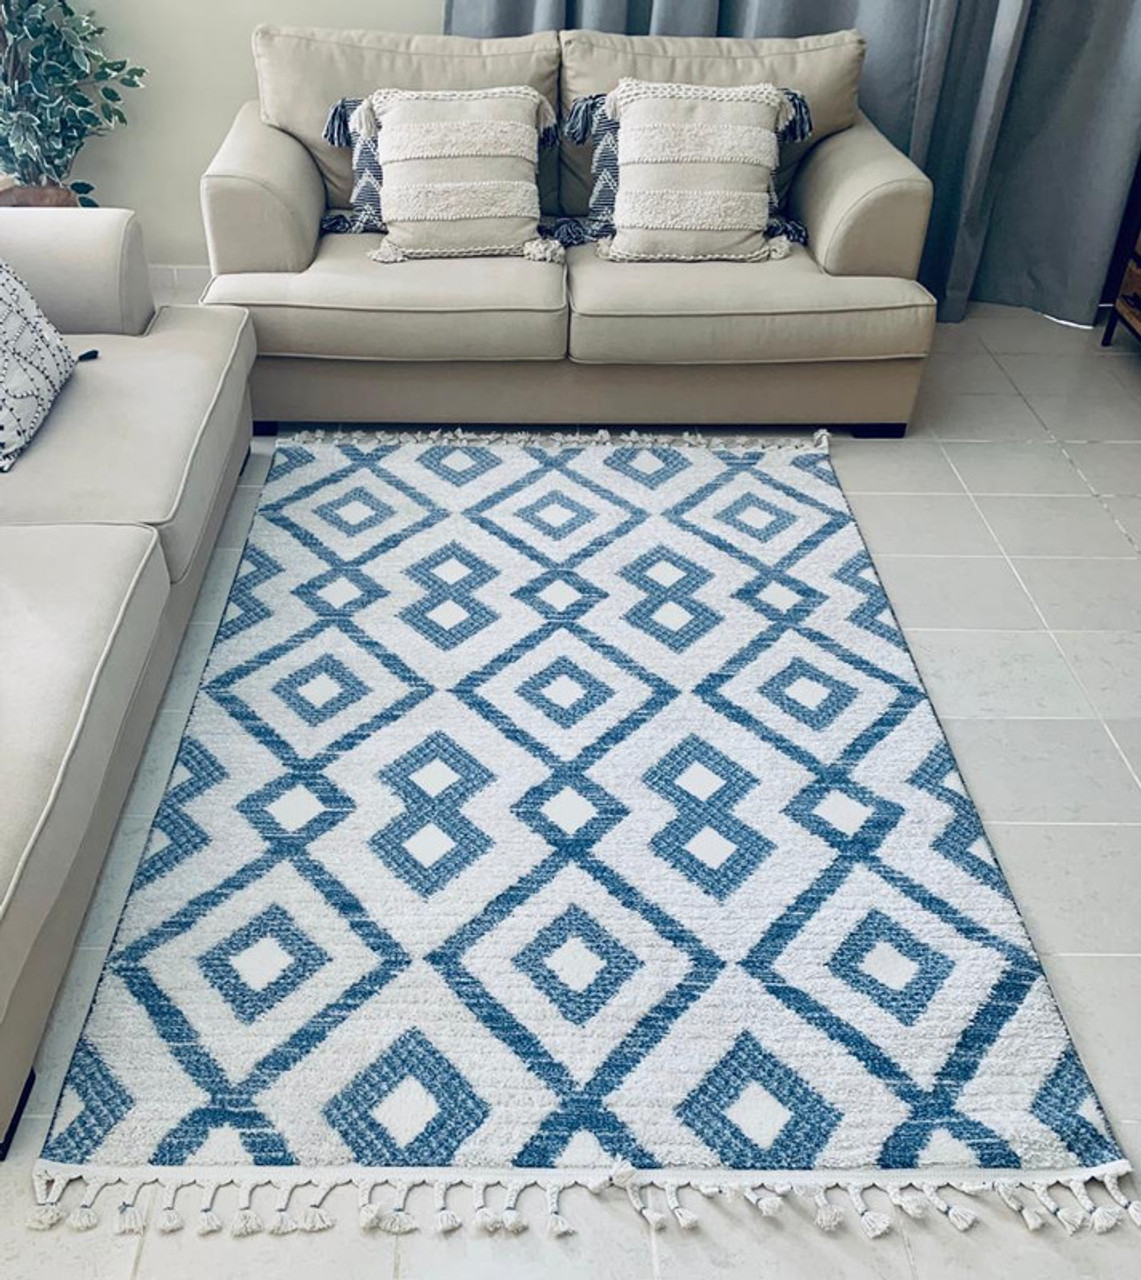 Flash Furniture Gideon Collection Geometric 5' x 5' Blue, Grey, and White Round Olefin Area Rug with Cotton Backing, Living Room, Bedroom